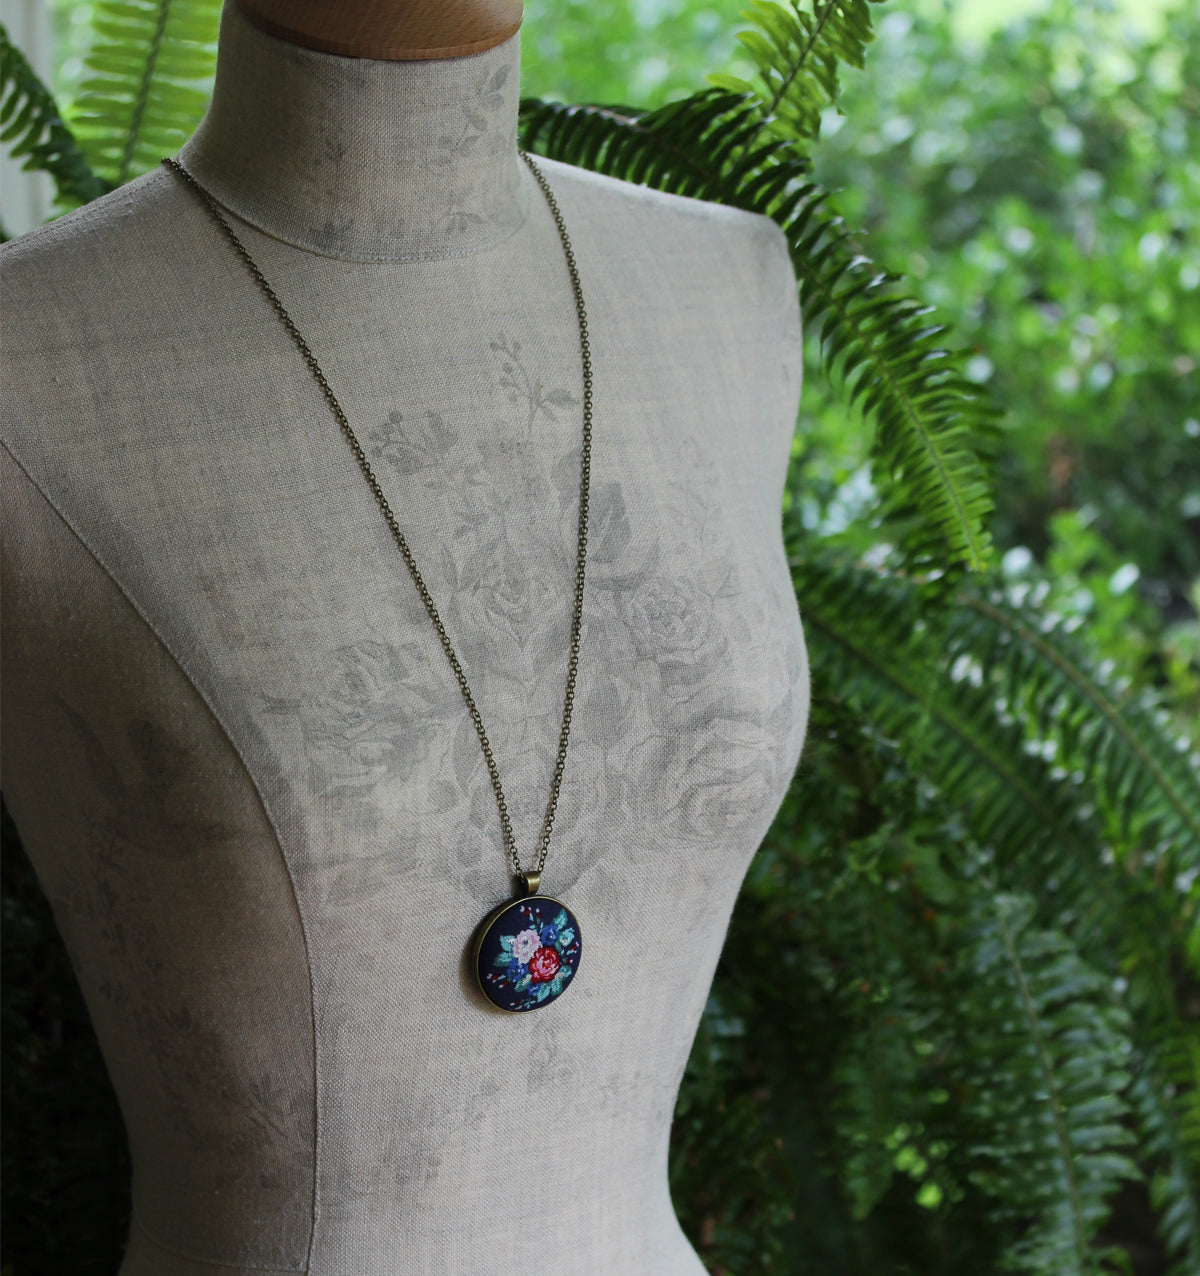 Navy Blue, Teal, And Red Floral Fabric Pendant, Hippie Jewelry